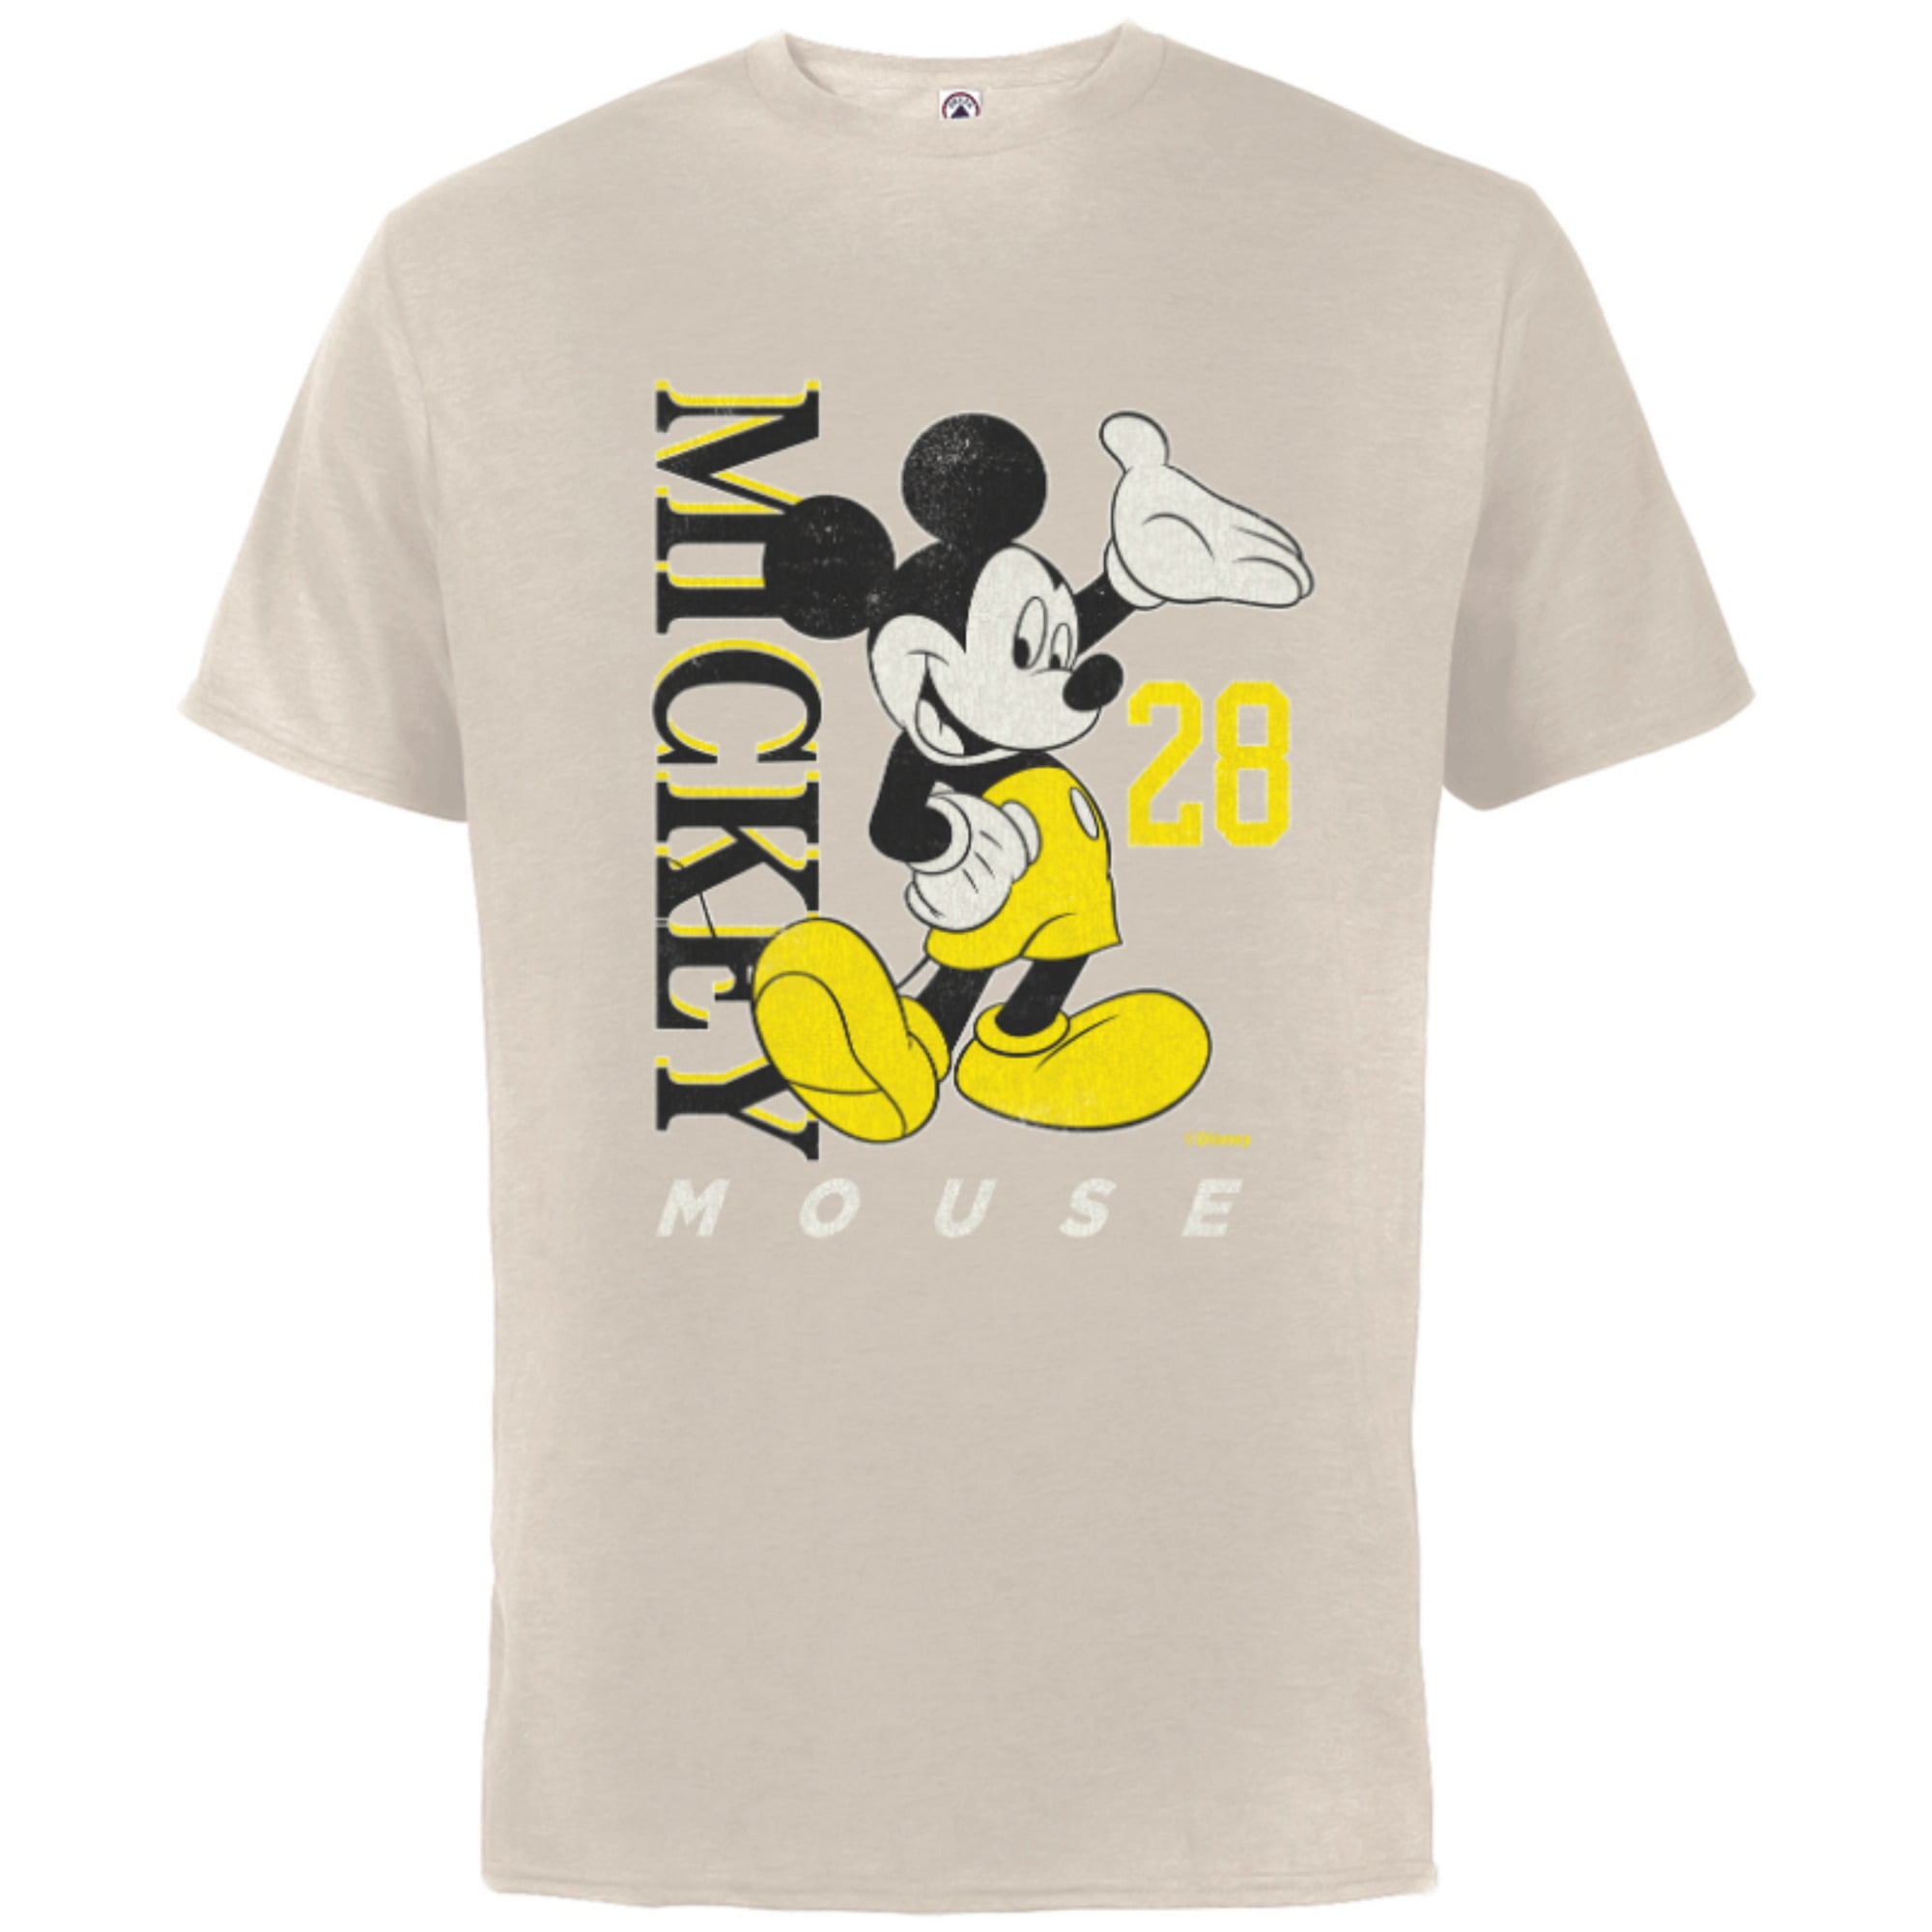 Disney Mickey Mouse Vintage T-Shirt 28 Sleeve for Adults Classics - Short Yellow & Customized-Black Cotton Black 